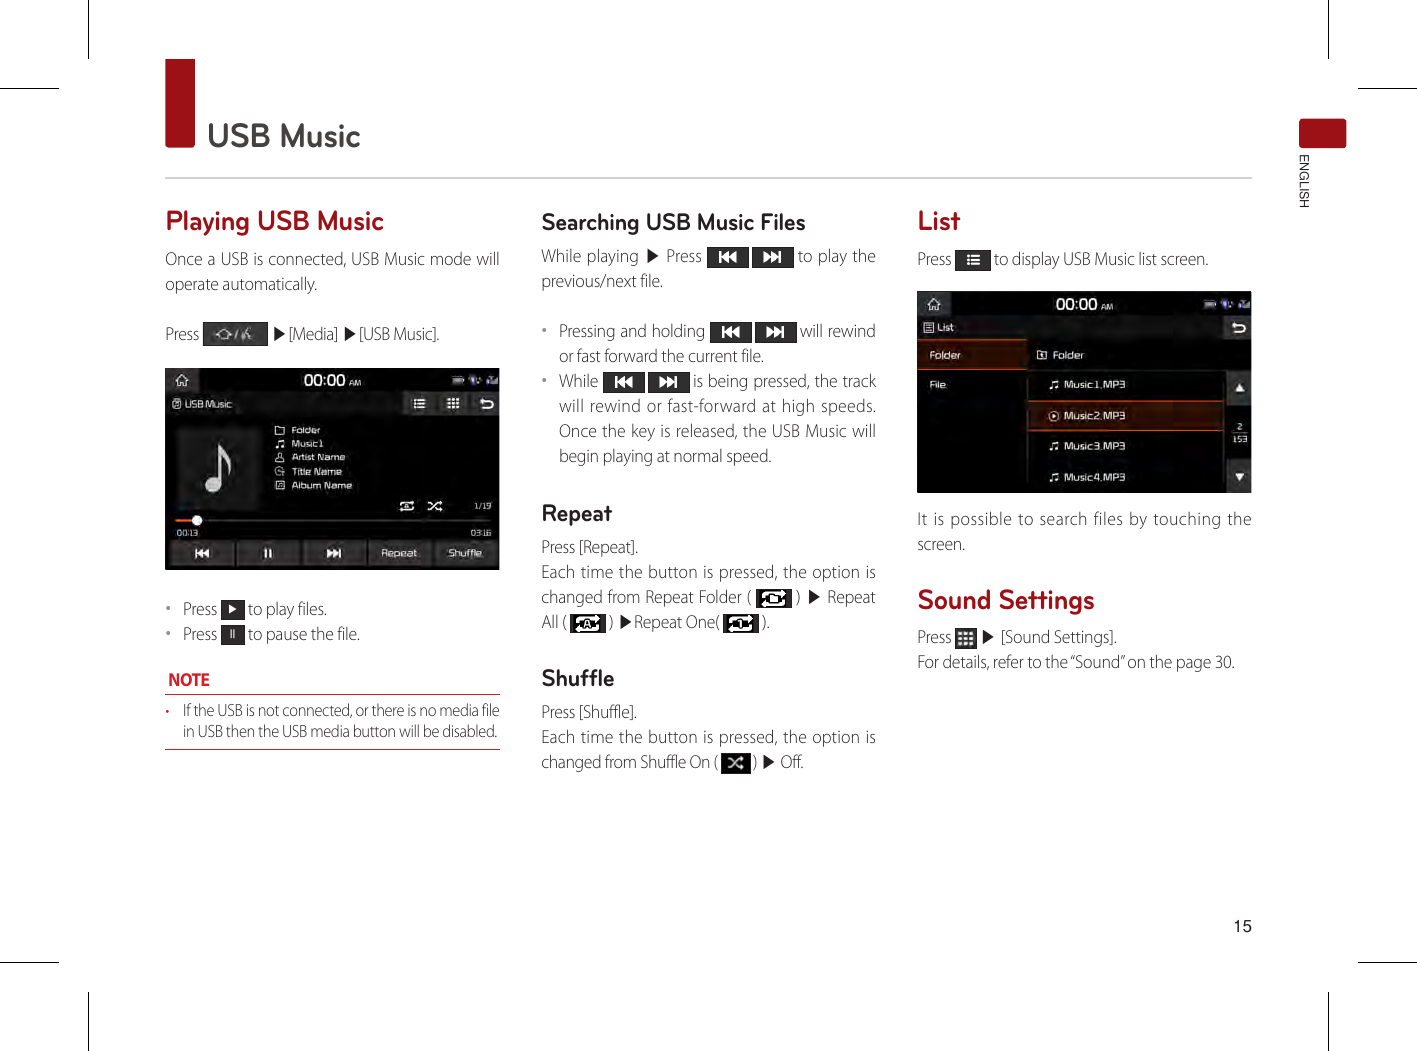  15USB MusicENGLISHPlaying USB Music Once a USB is connected, USB Music mode will operate automatically.Press   ▶[Media] ▶[USB Music].••Press ▶ to play files.••Press ll to pause the file. NOTE• If the USB is not connected, or there is no media file in USB then the USB media button will be disabled. Searching USB Music FilesWhile playing ▶ Press    to play the previous/next file. ••Pressing and holding    will rewind or fast forward the current file.••While    is being pressed, the track will rewind or fast-forward at high speeds. Once the key is released, the USB Music will begin playing at normal speed.RepeatPress [Repeat].Each time the button is pressed, the option is changed from Repeat Folder (   ) ▶ Repeat All (   ) ▶Repeat One(   ).ShufflePress [Shuffle].Each time the button is pressed, the option is changed from Shuffle On (   ) ▶ Off.ListPress   to display USB Music list screen.It is possible to search files by touching the screen. Sound SettingsPress   ▶ [Sound Settings].For details, refer to the “Sound” on the page 30.